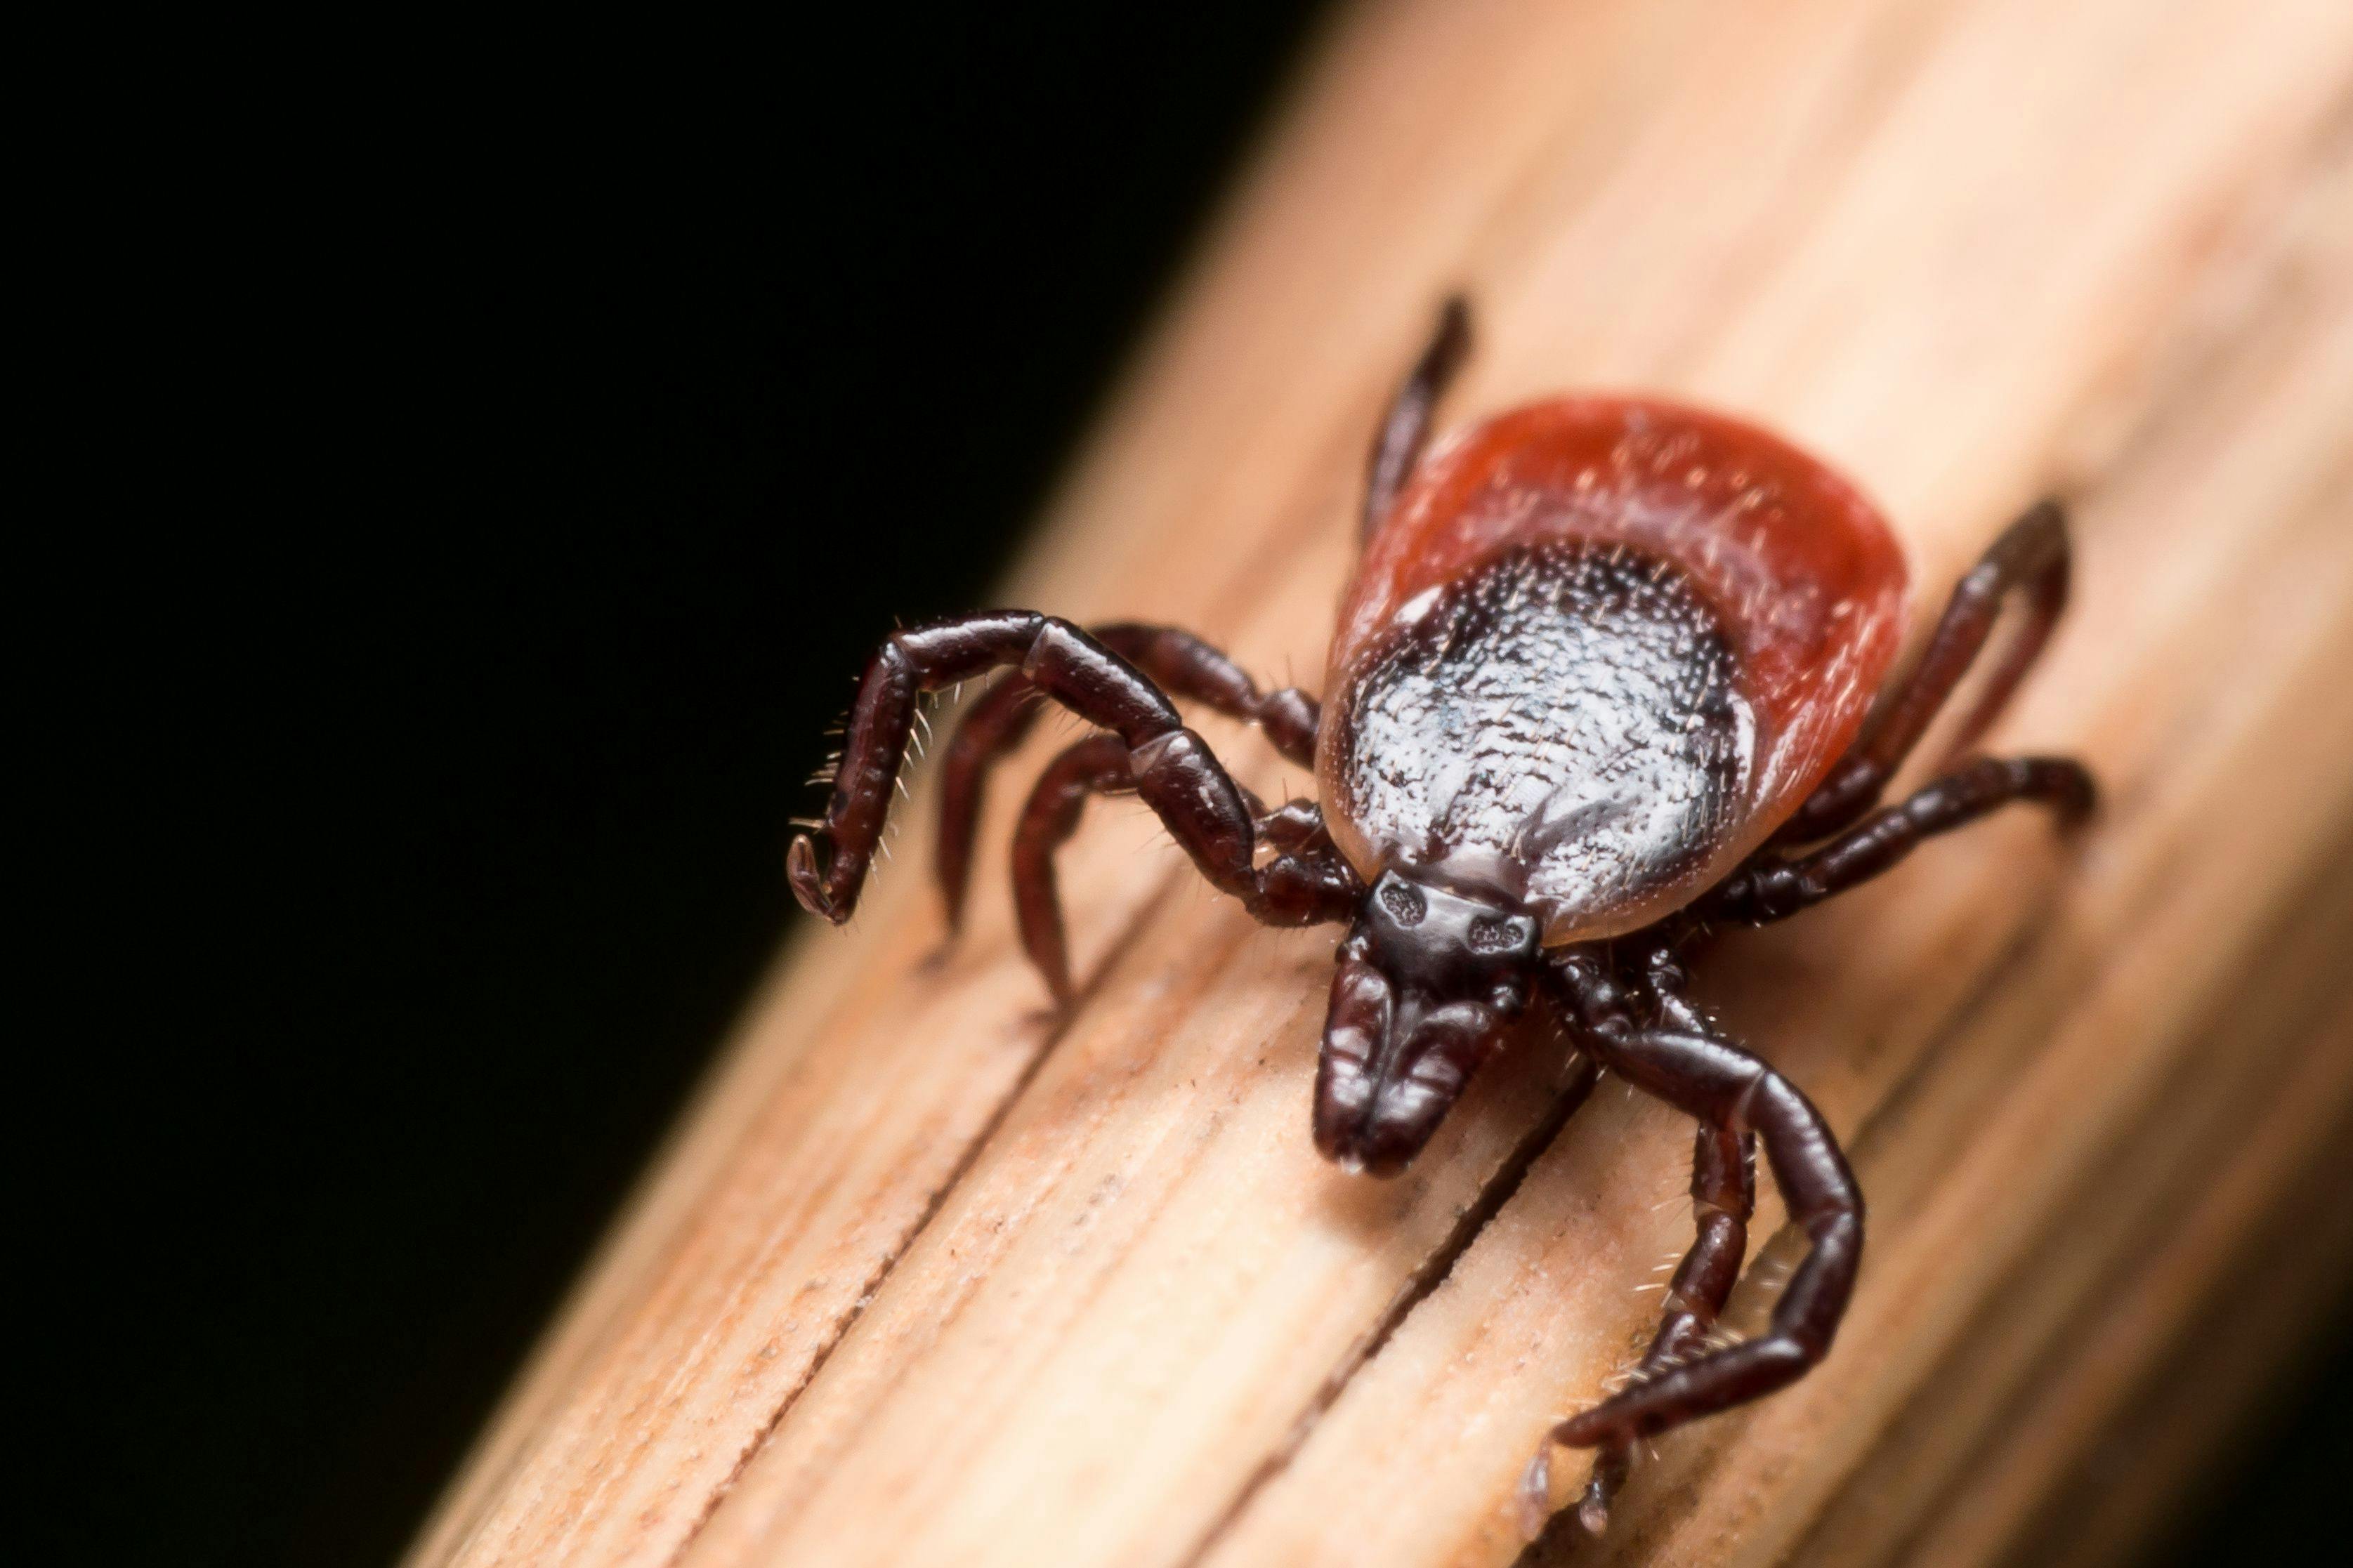 A Single Test is Able to Diagnose 8 Tick-Borne Diseases